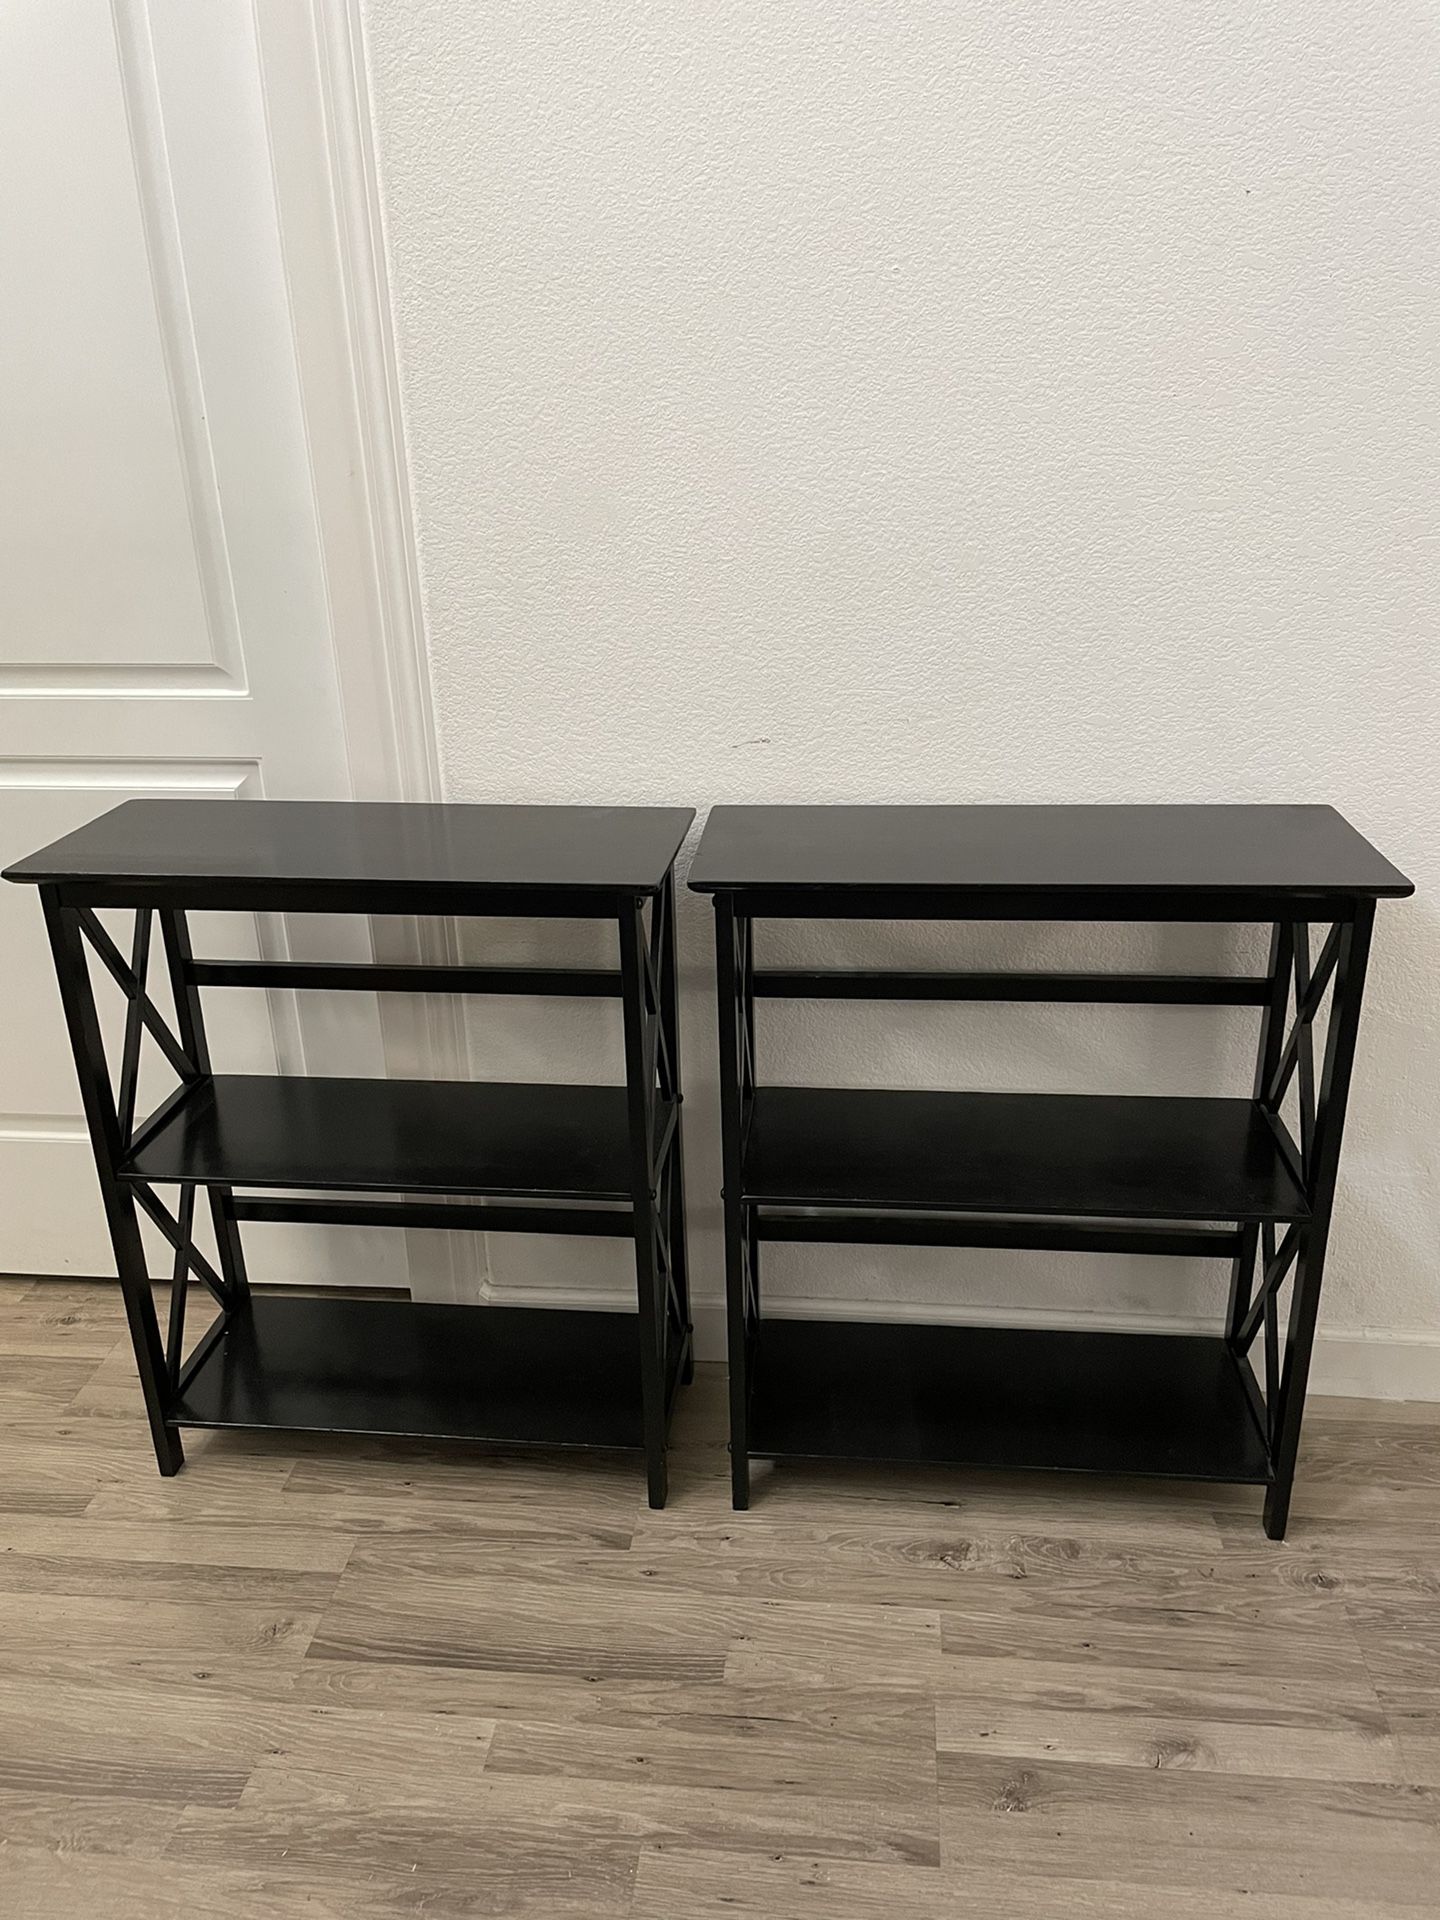 Two Beautiful Bookshelves With Great Condition 